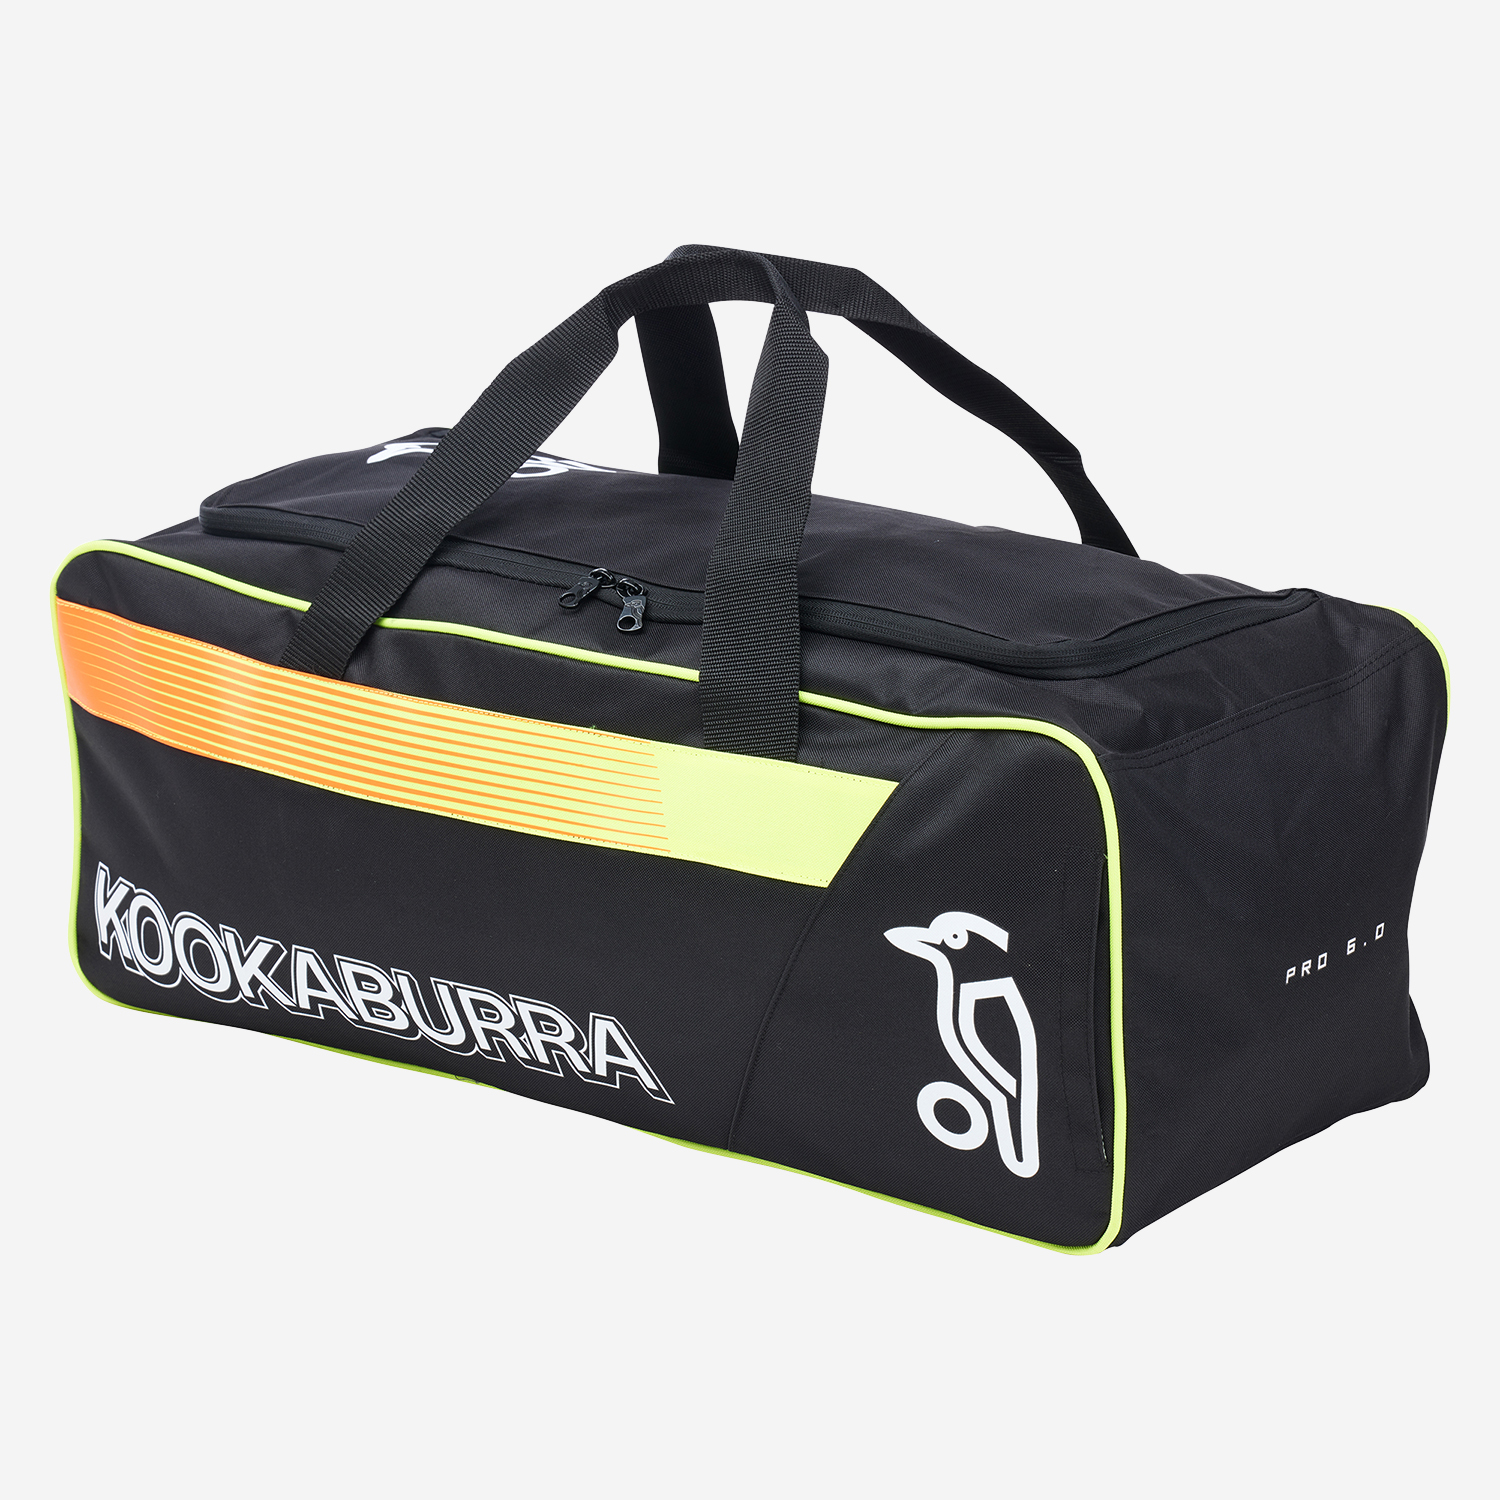 Pro 6.0 Holdall Cricket Bags